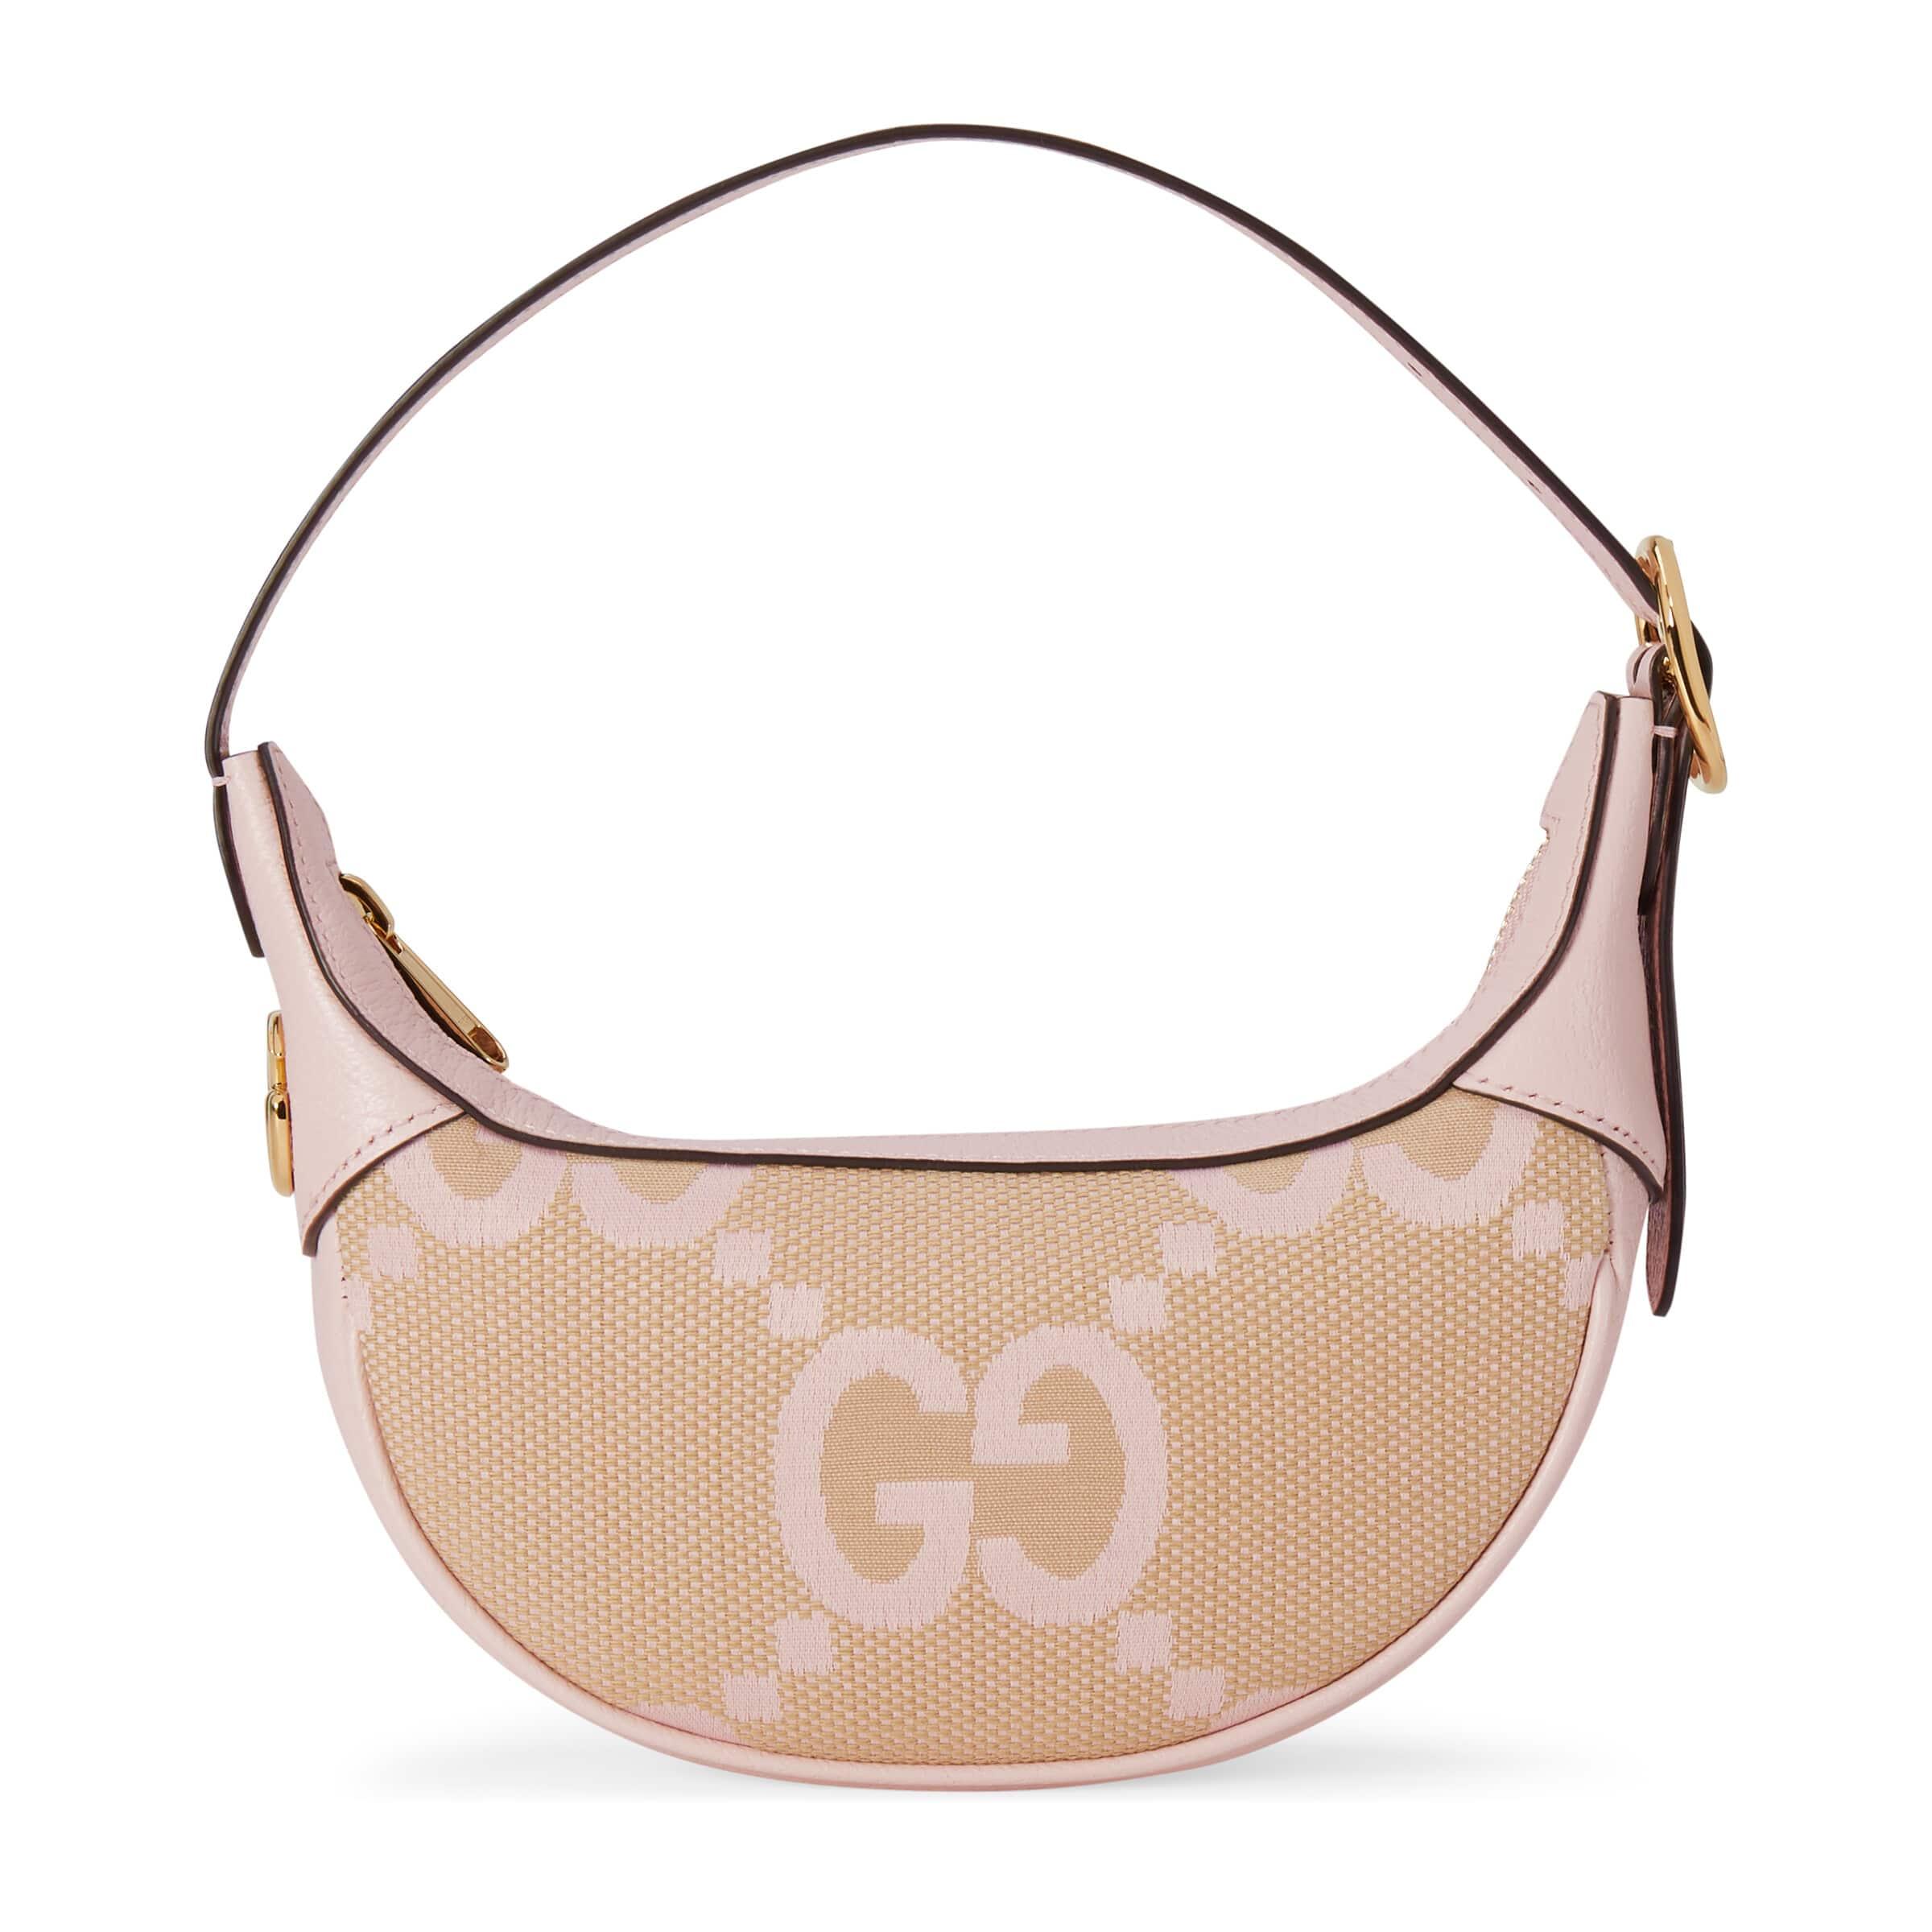 Gucci Ophidia Jumbo GG Small Shoulder Bag Beige/Lilac in Canvas